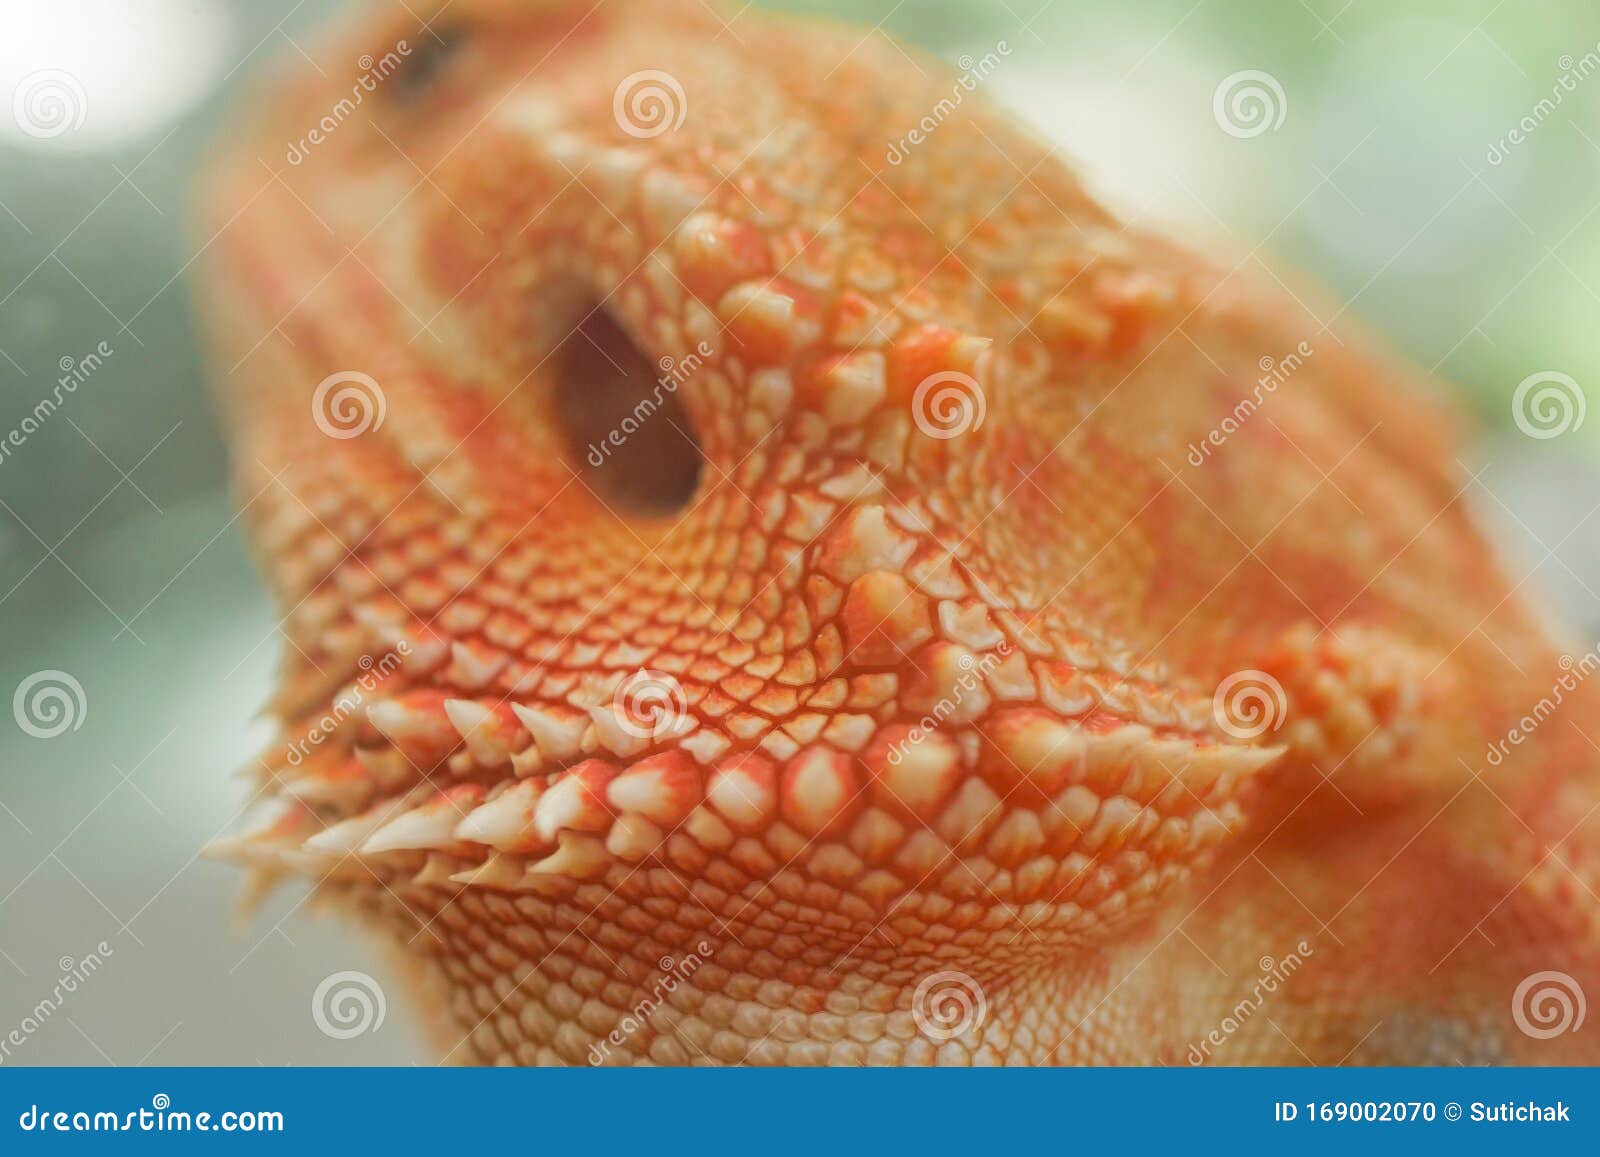 close-up pattern skin, reptil animal of small exotic pet